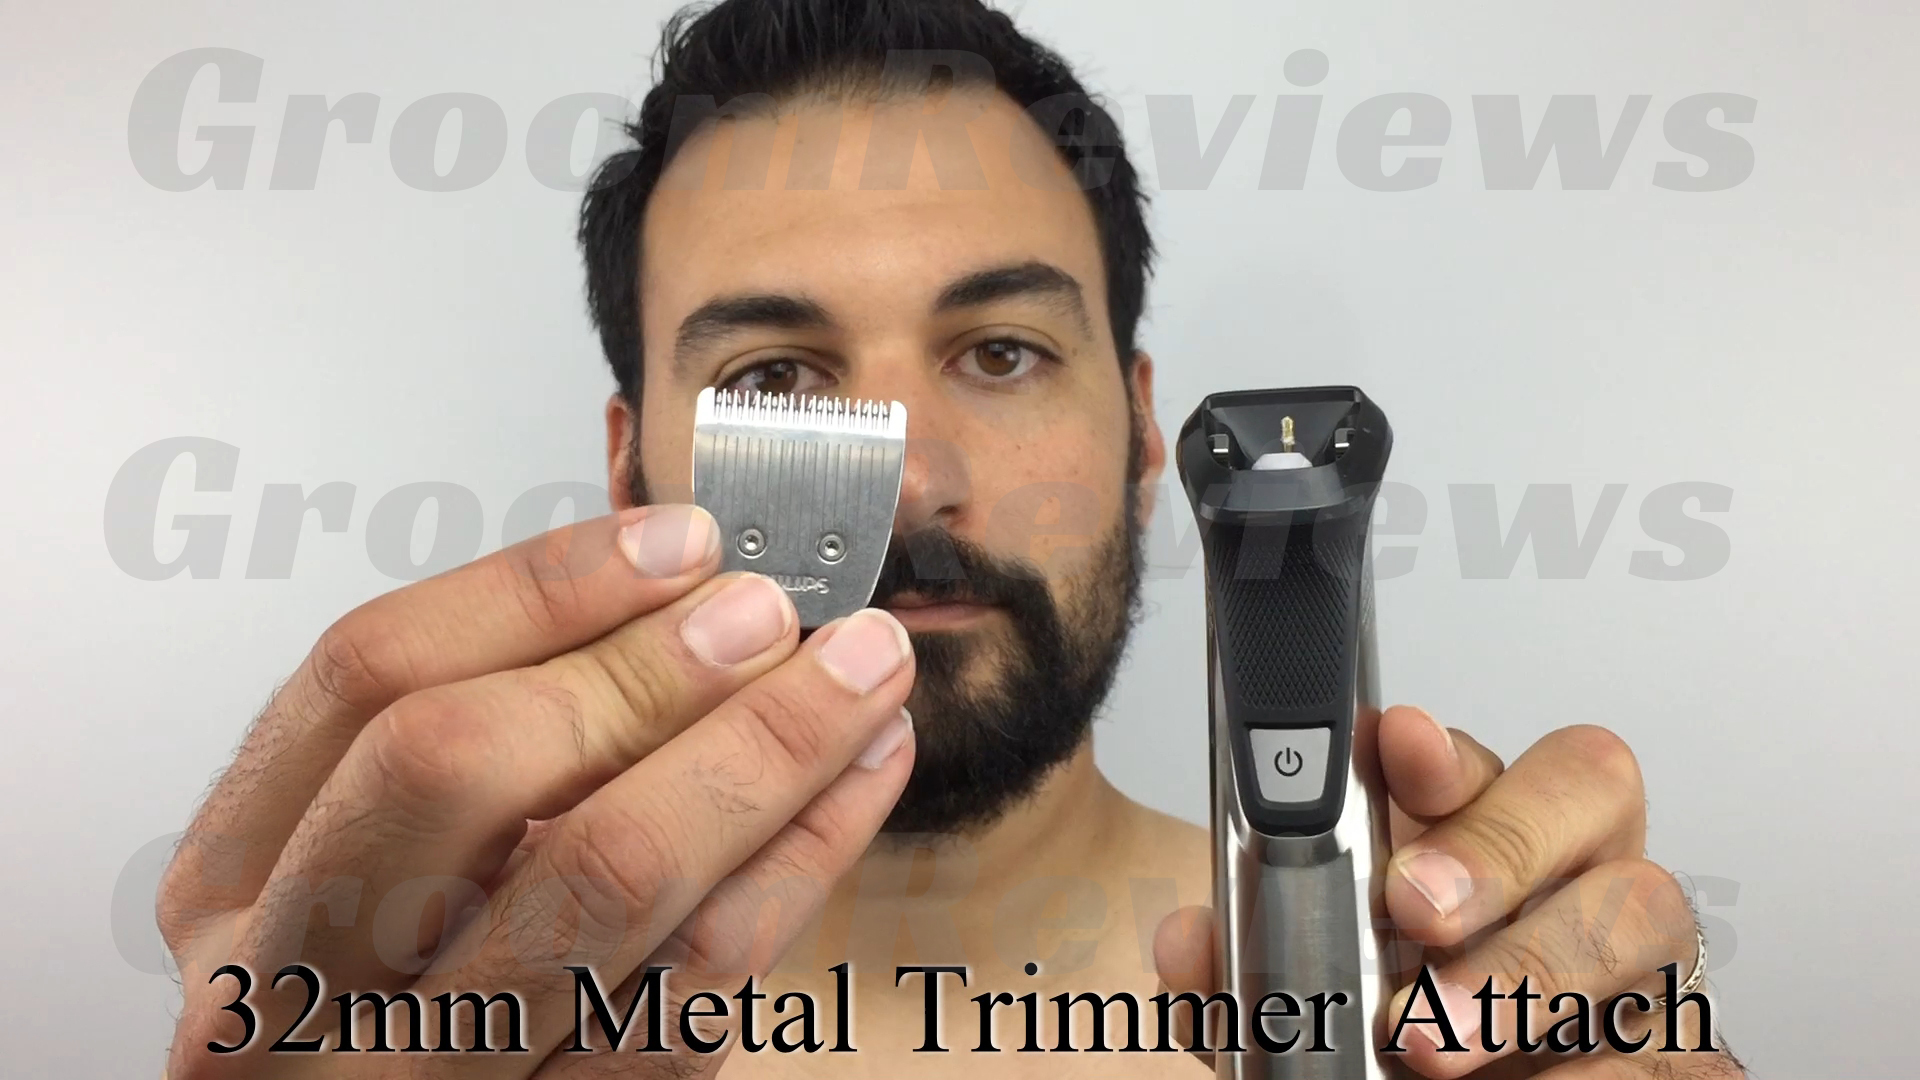 philips trimmer 7715